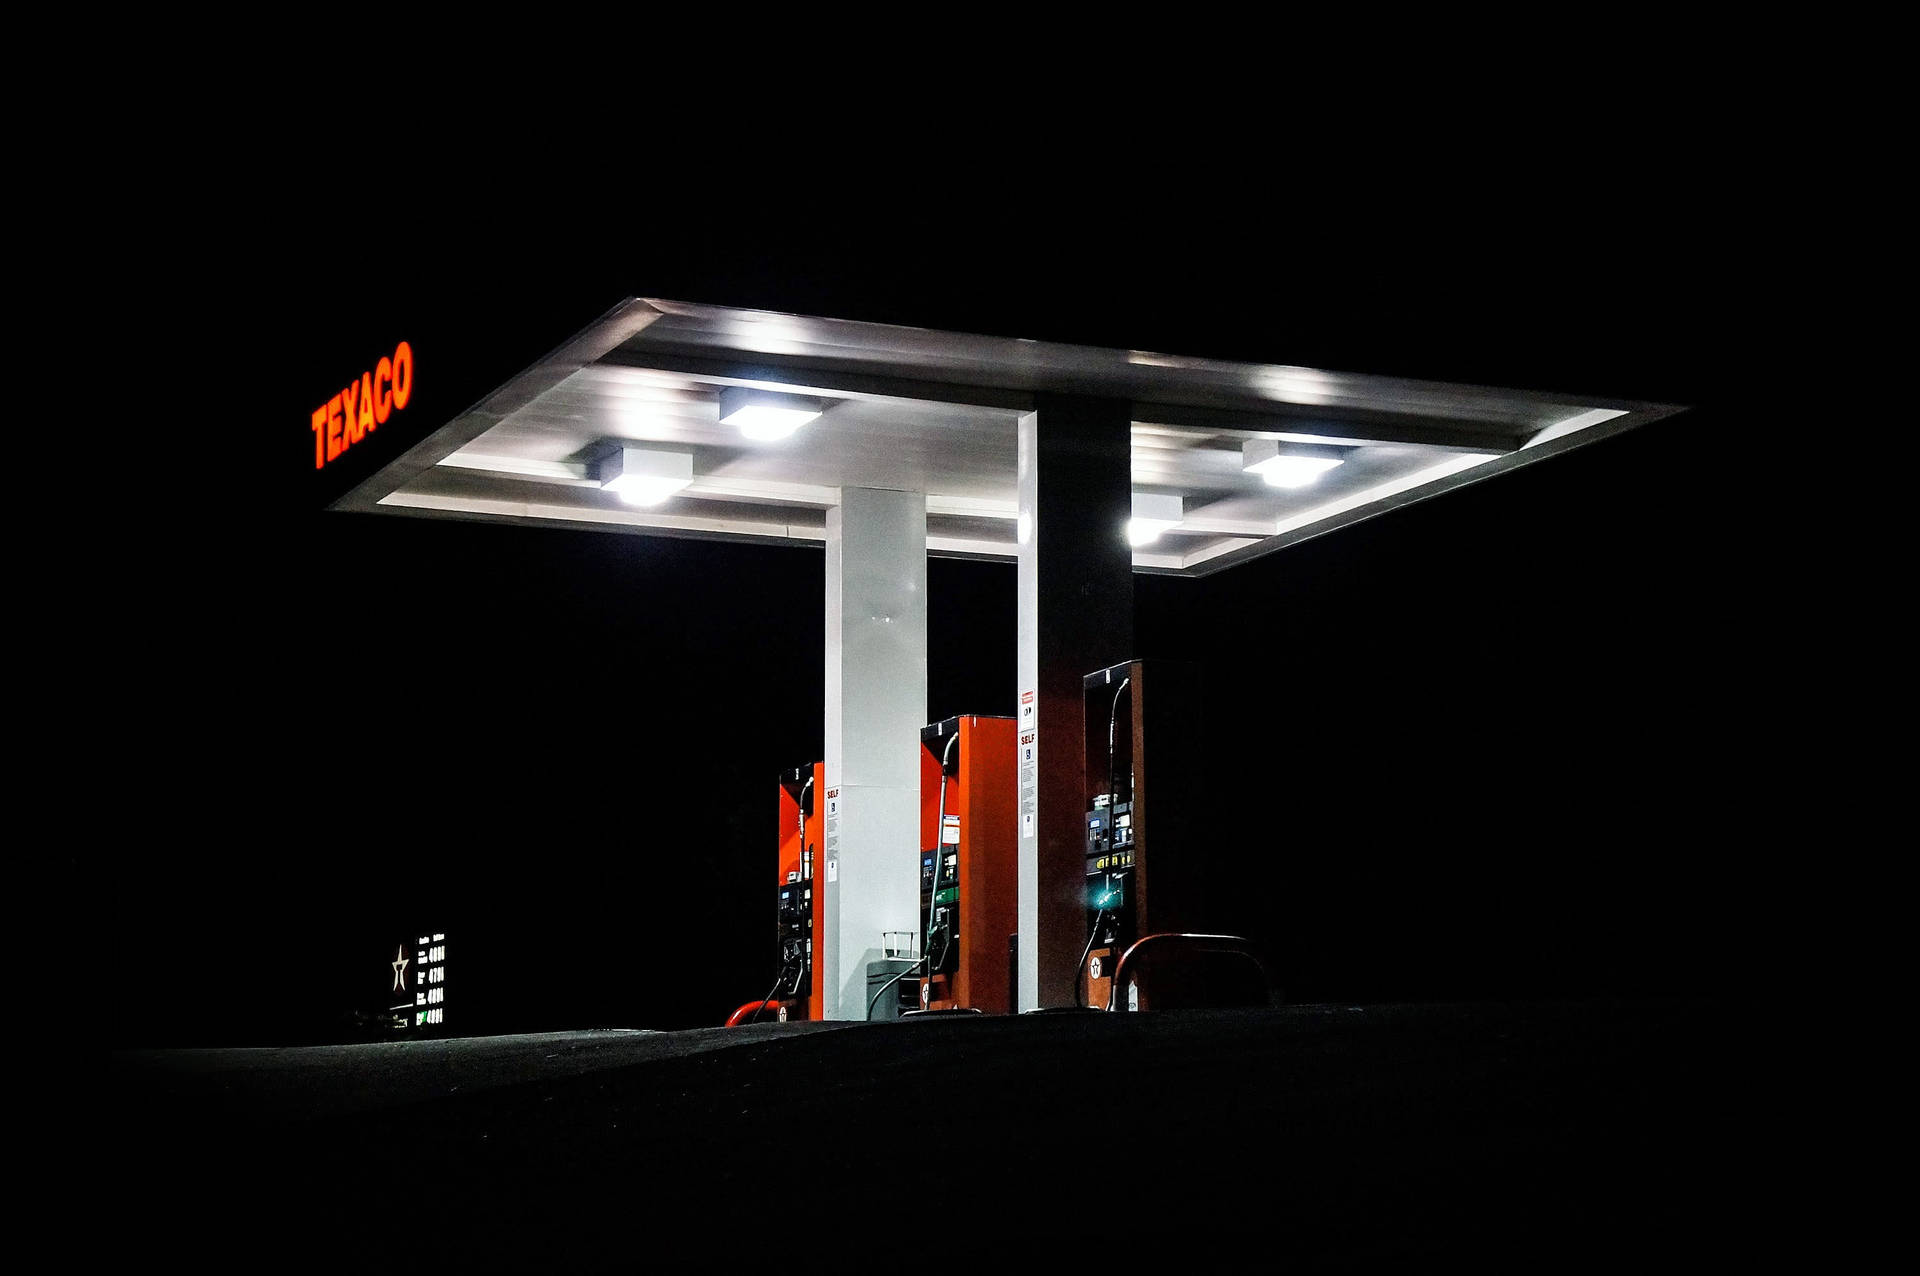 Lonely Texaco Gas Station Wallpaper